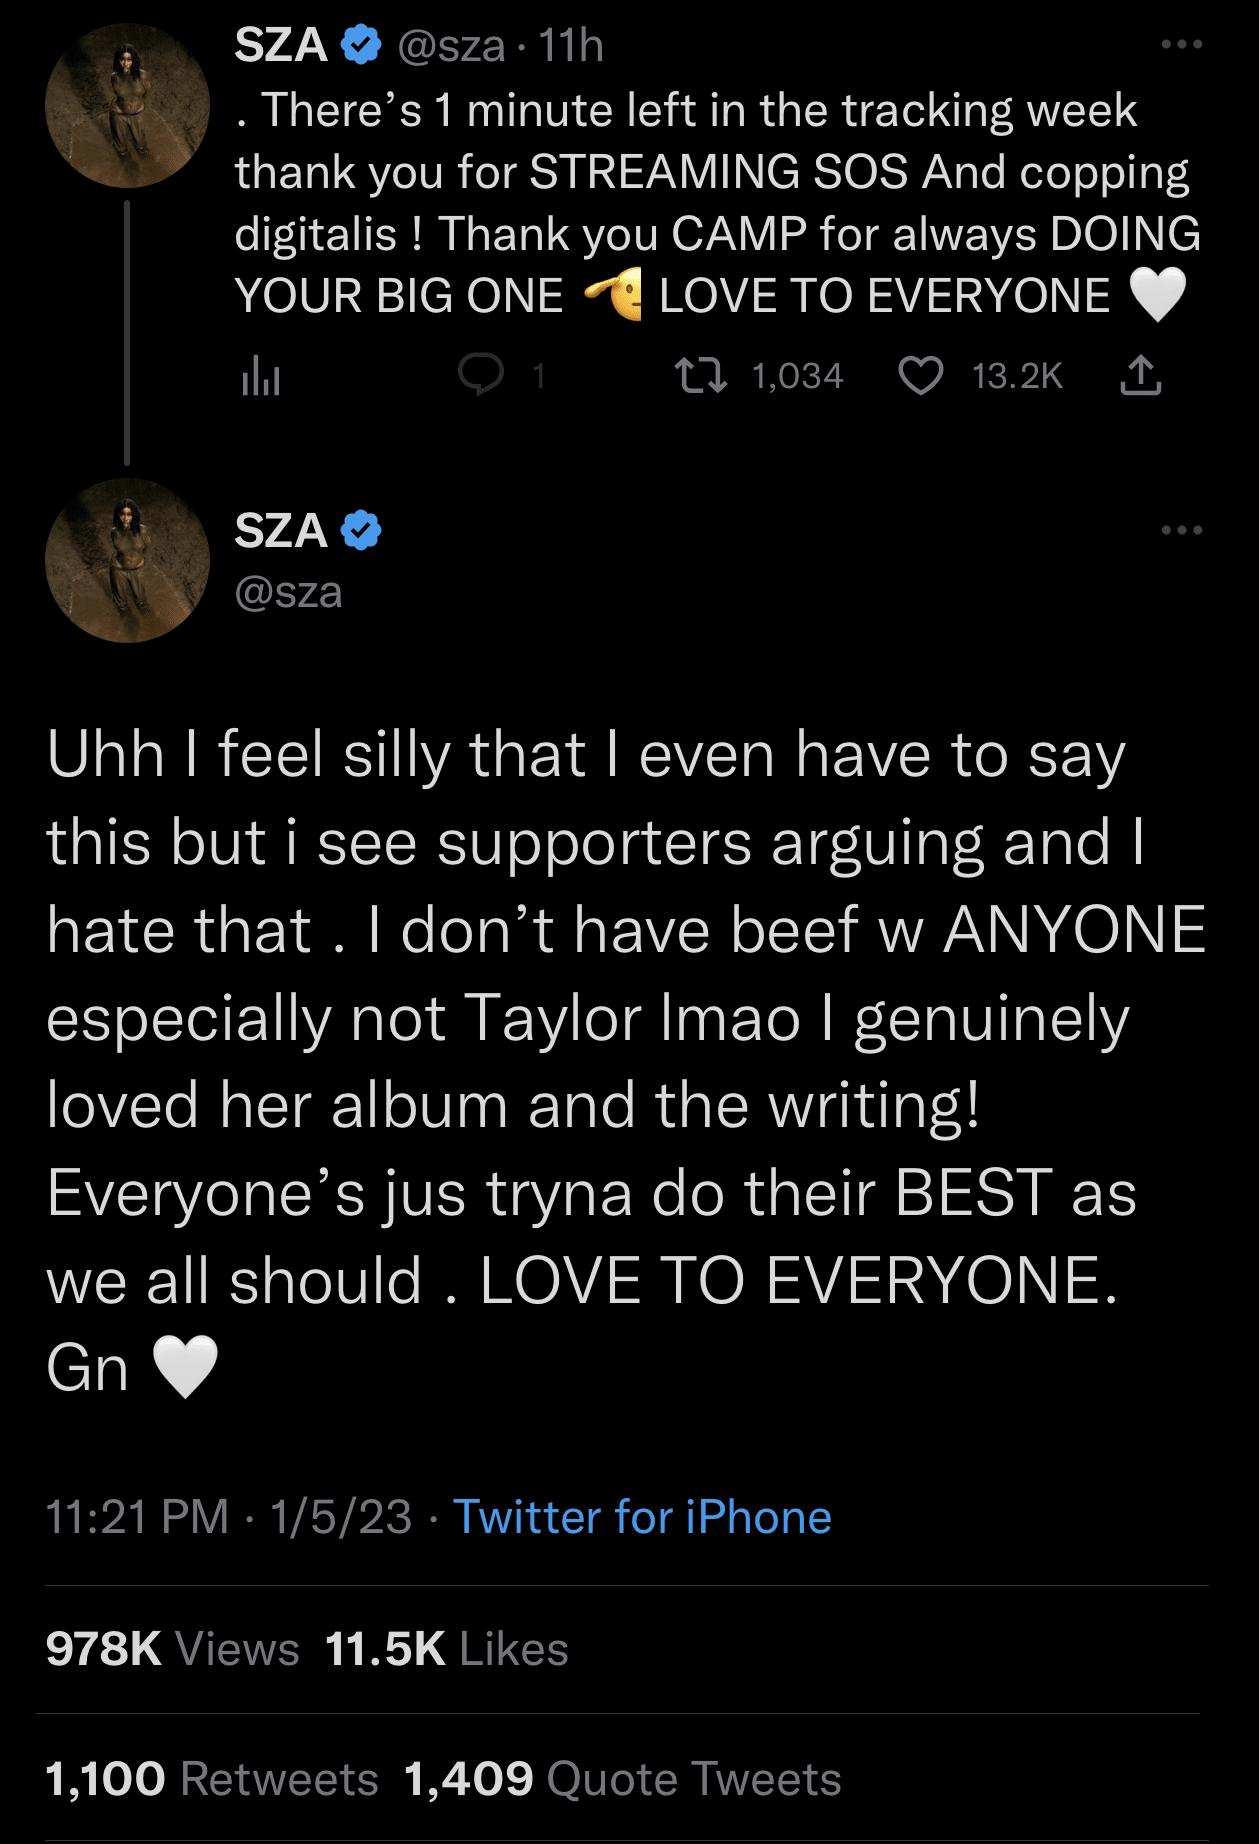 SZA is seen tweeting about Taylor